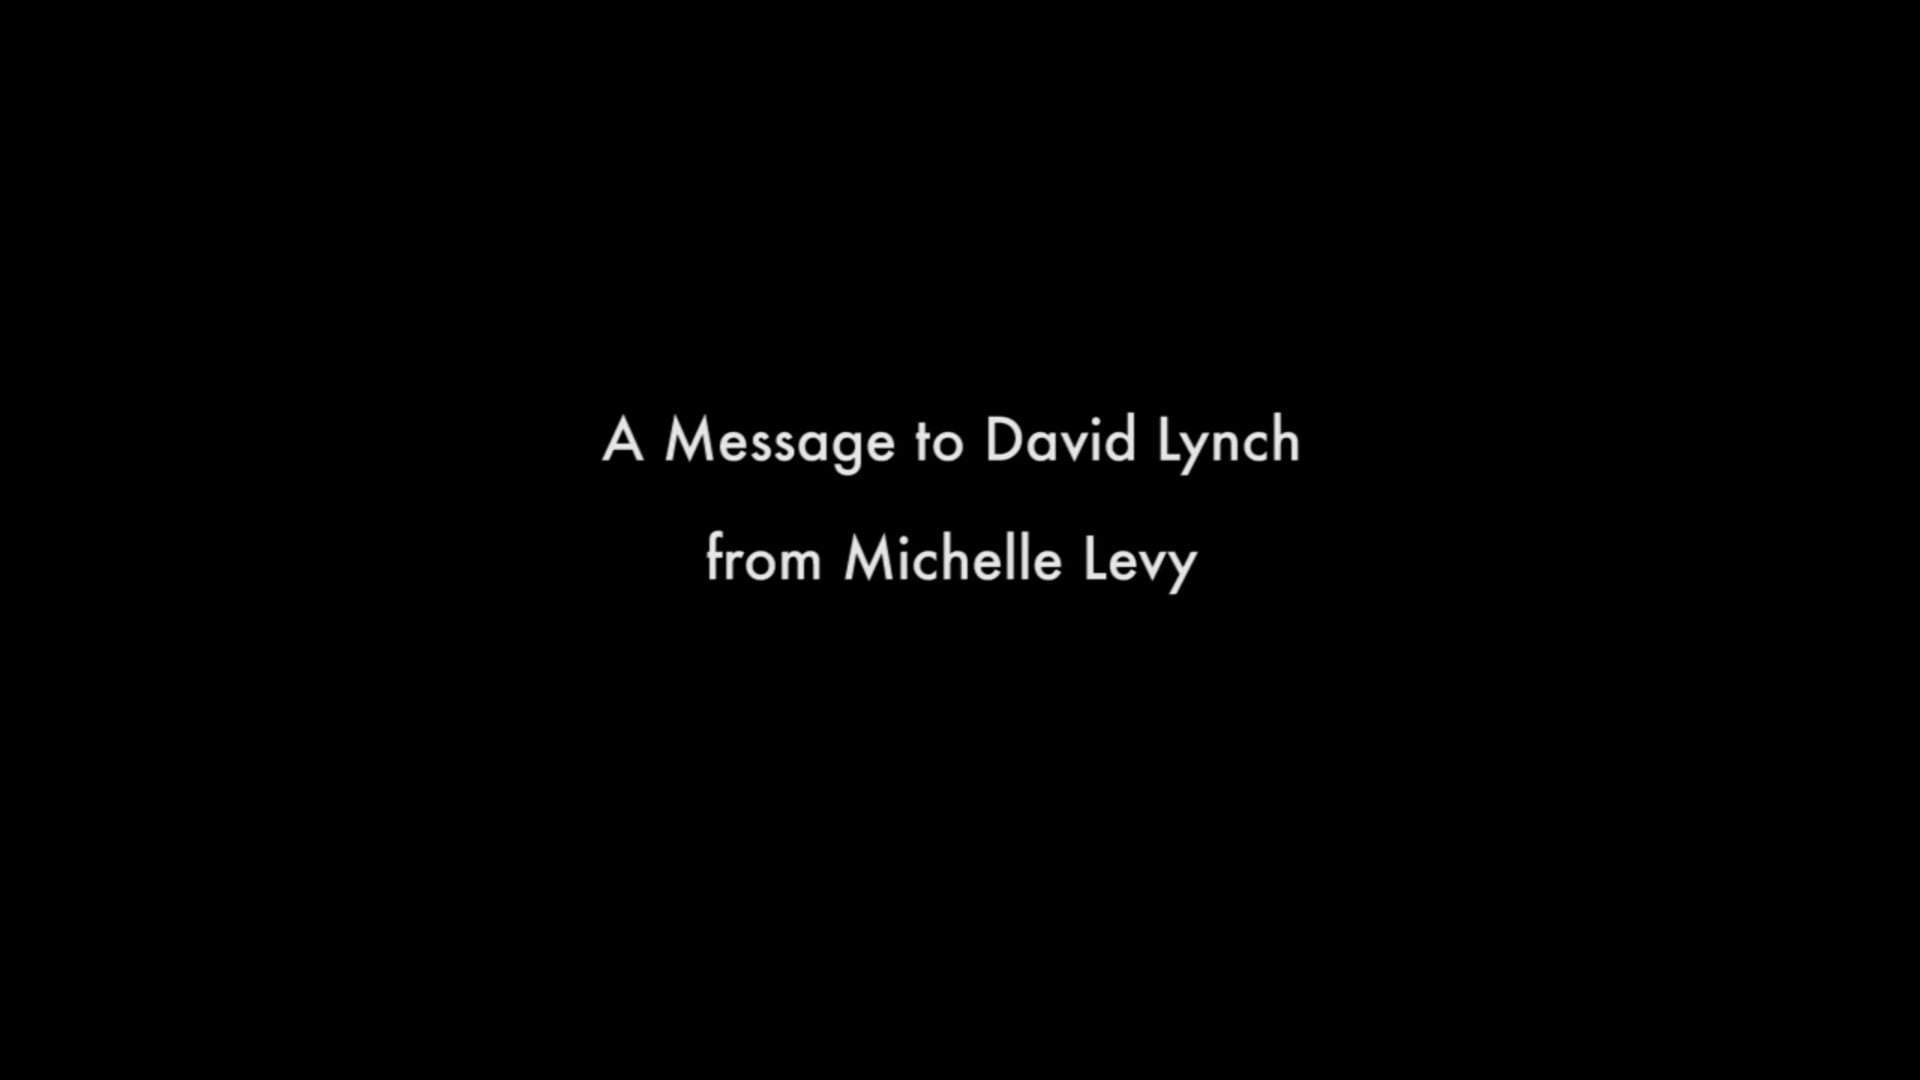 Dream Intercepted: an appeal to David Lynch